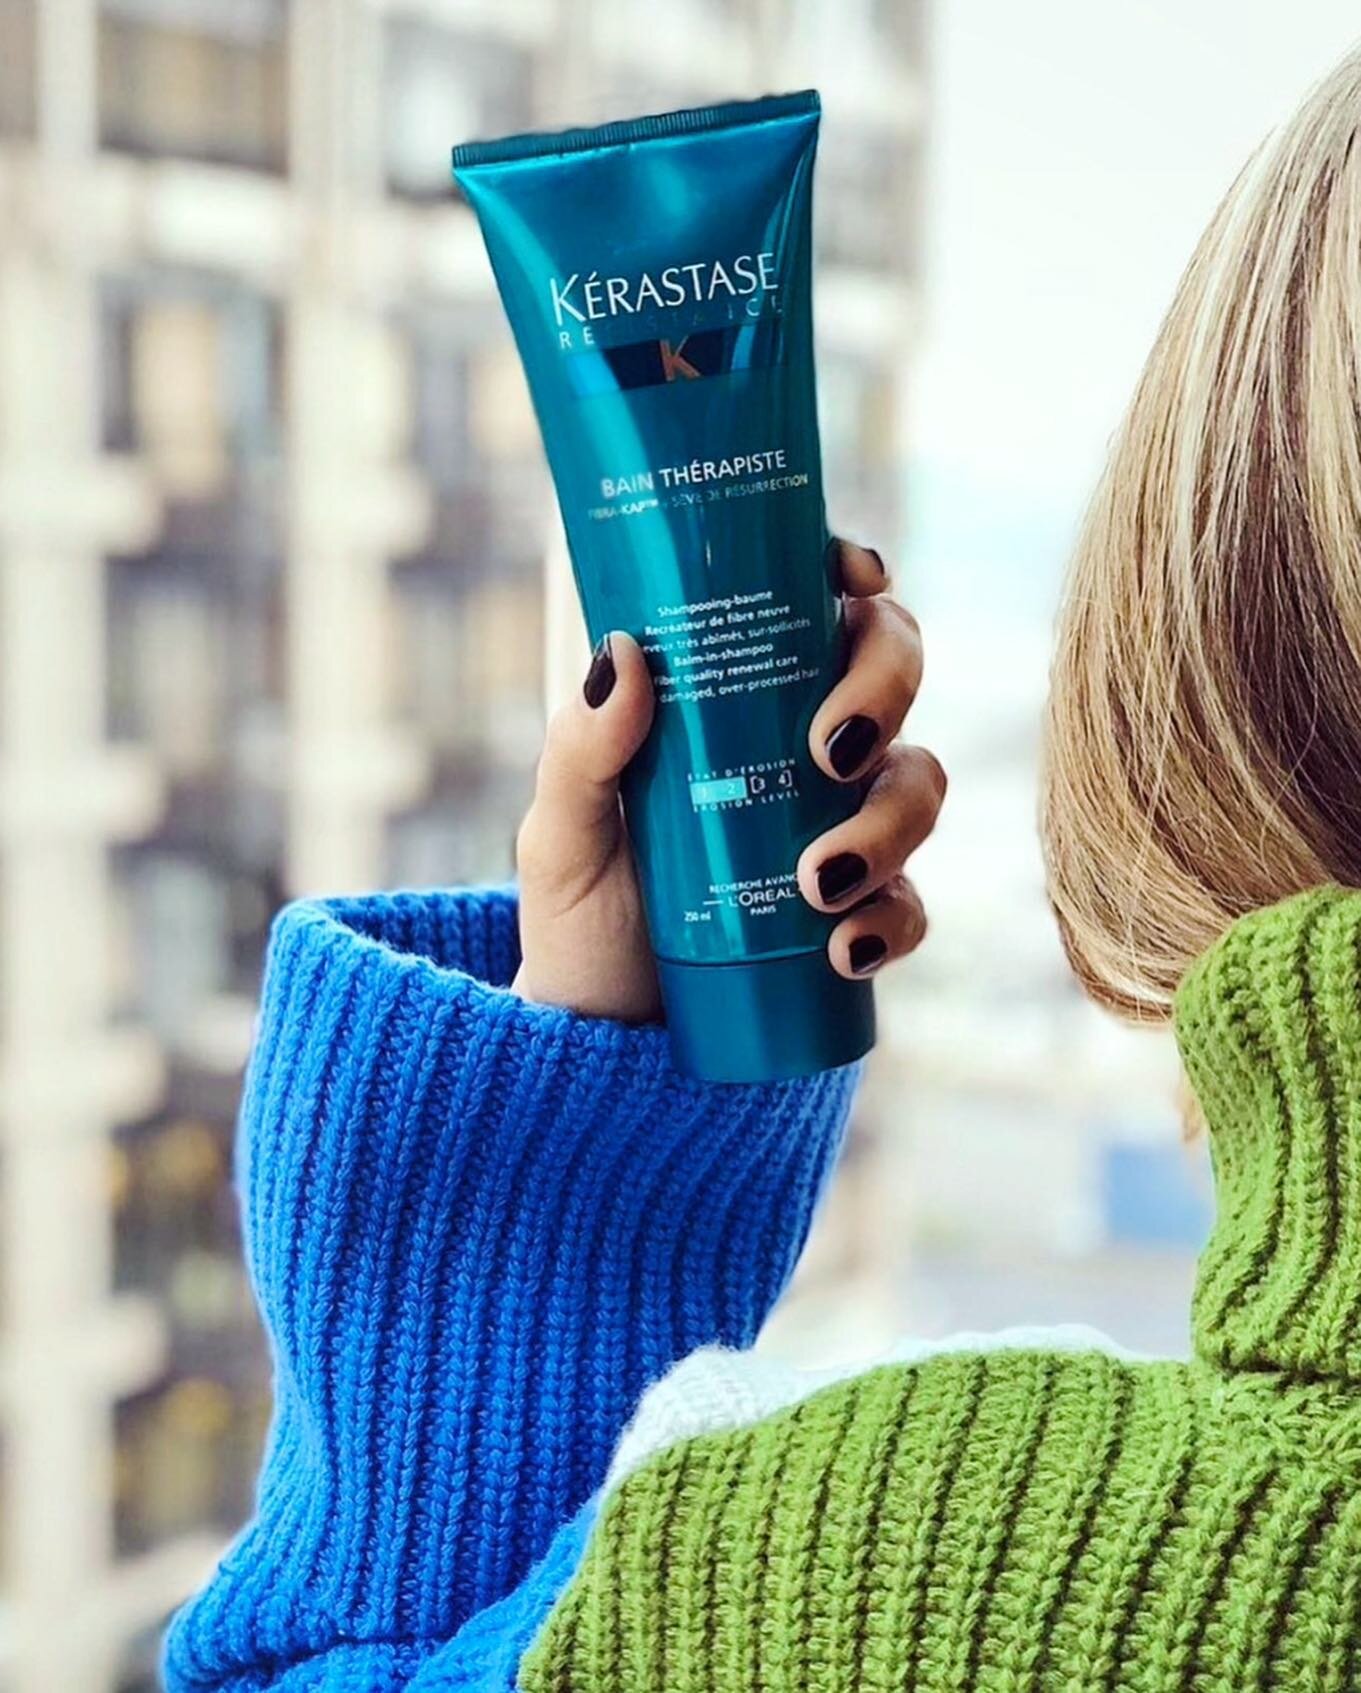 BAIN TH&Eacute;RAPISTE restores the flexibility and elasticity of damaged hair. Shampoo that enters the deepest layers of the cuticule to strengthen existing hair and stimulate growth.

Awarded ELLE Magazine and TotalBeauty.com's Reader's Choice
Beau